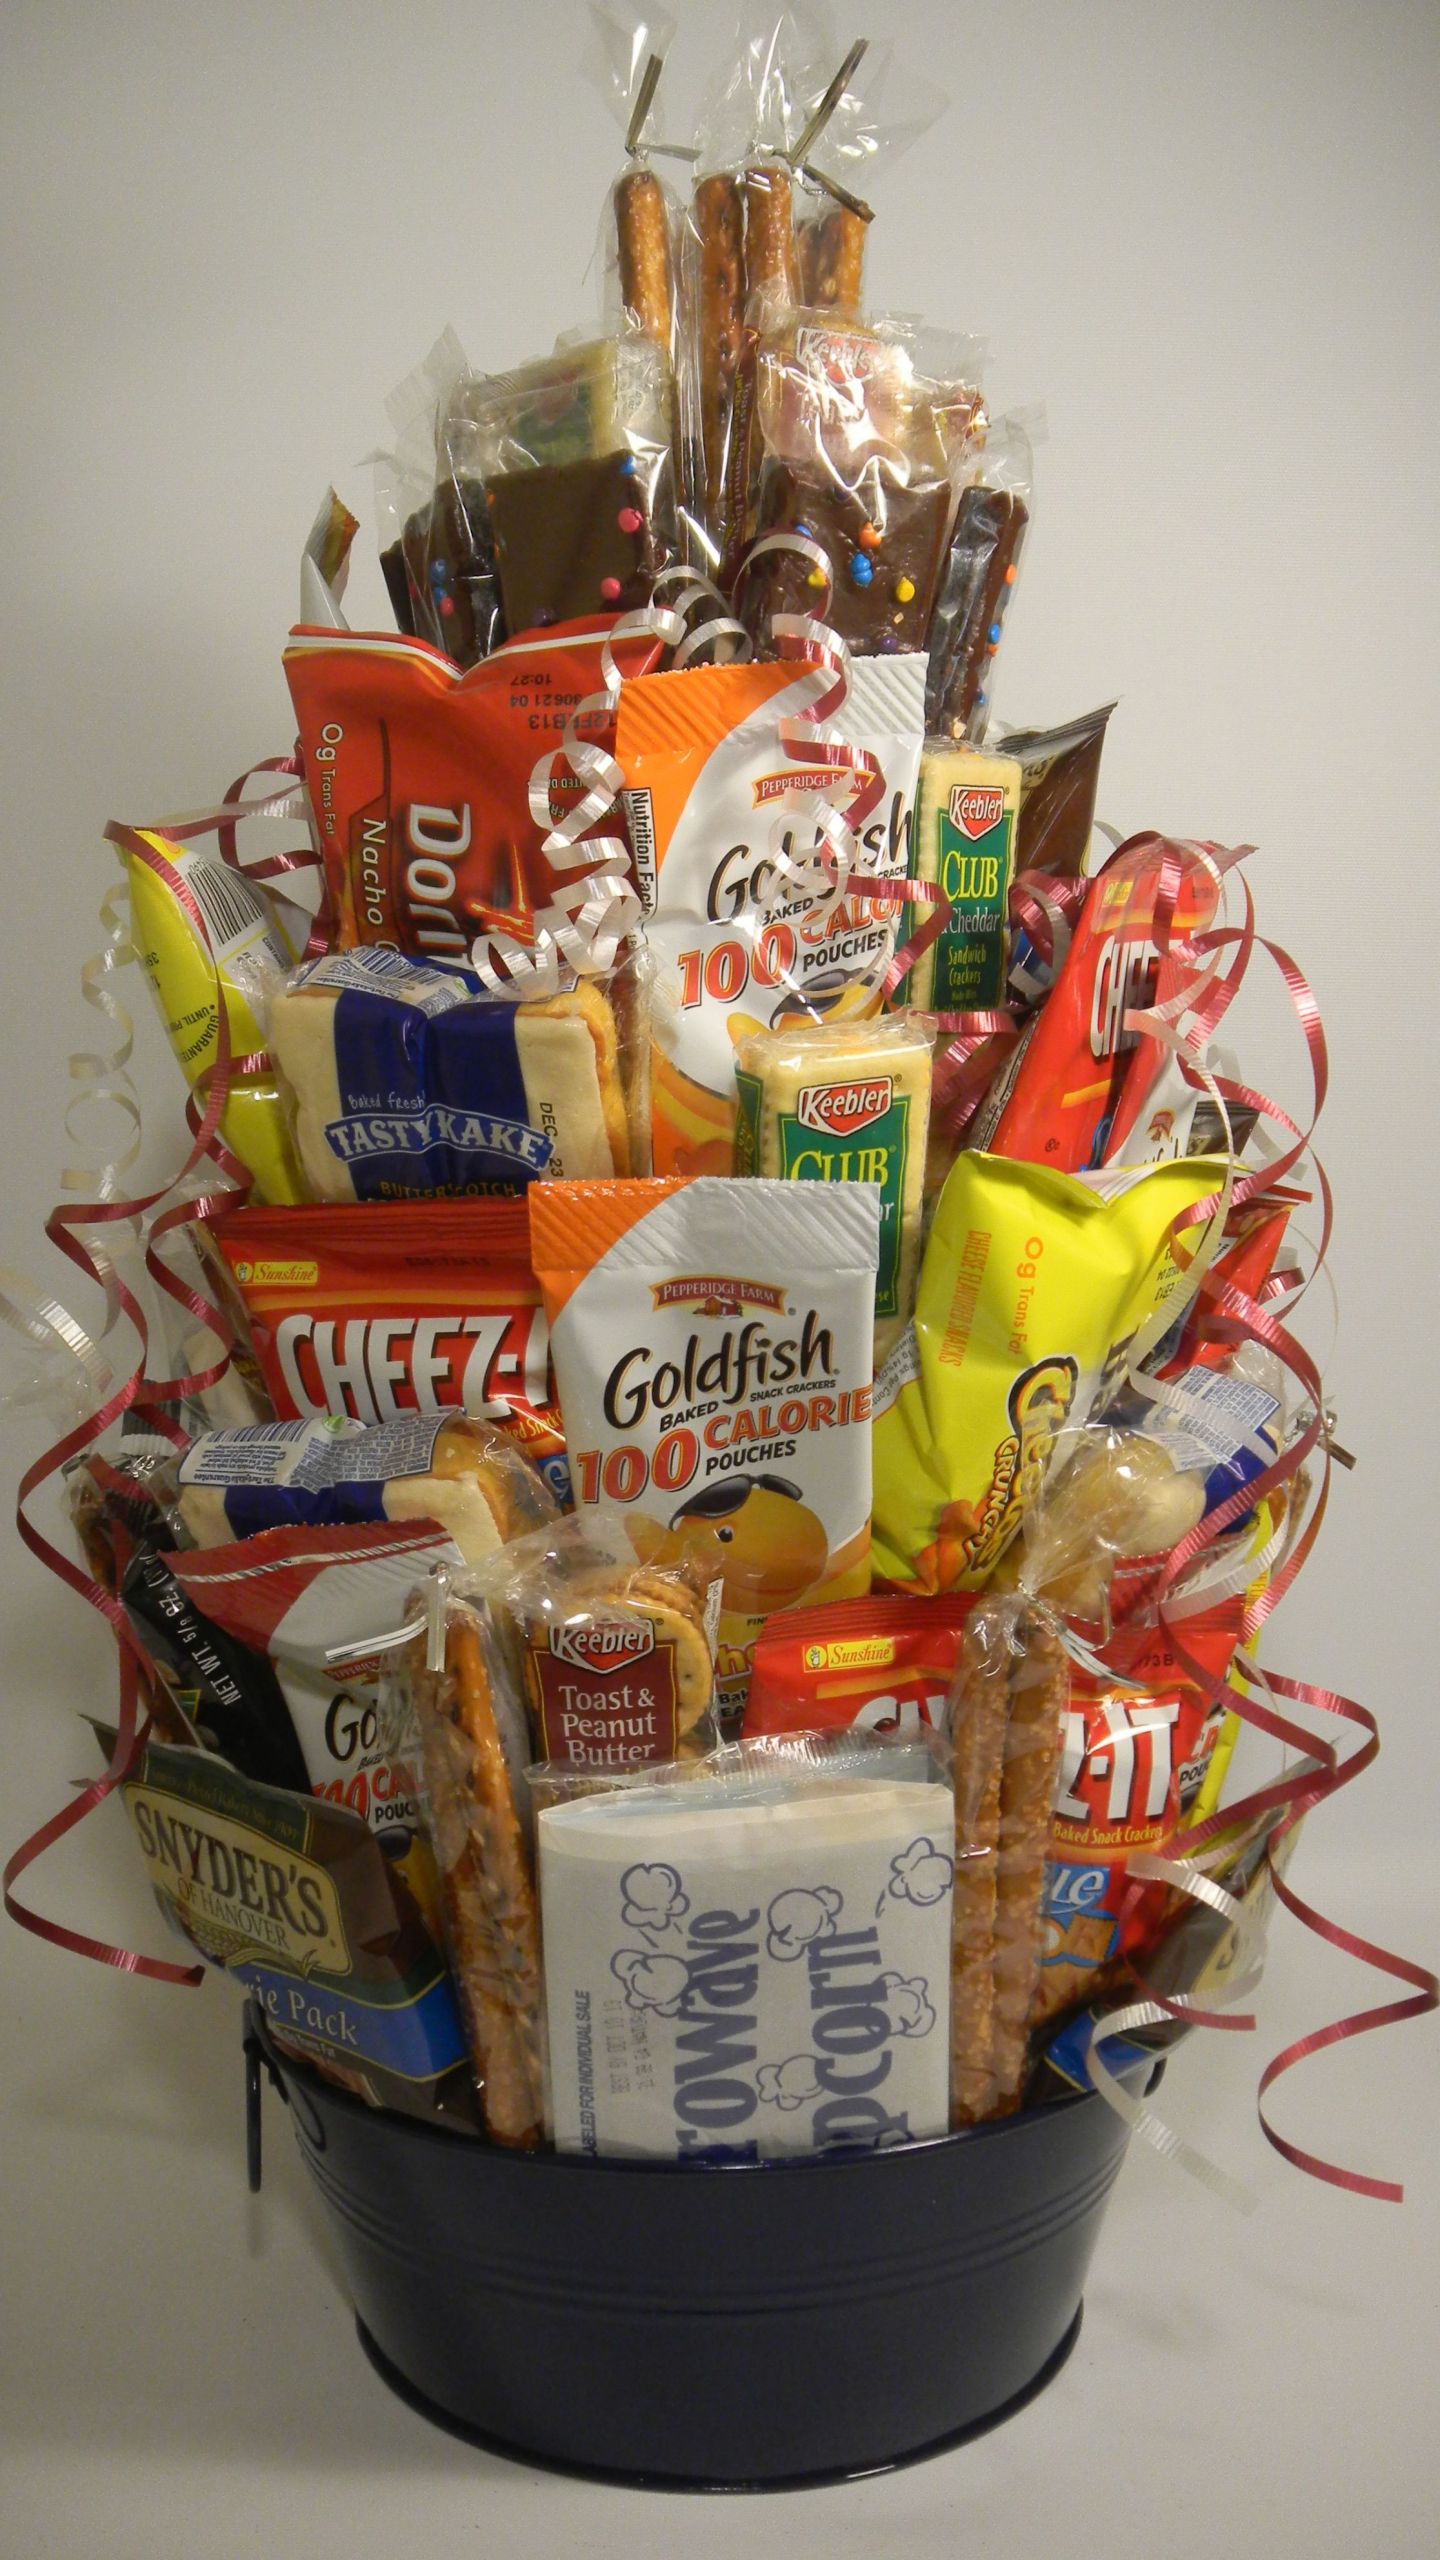 Finals Week Gift Basket Ideas
 "final exam survival care package" wish someone would use